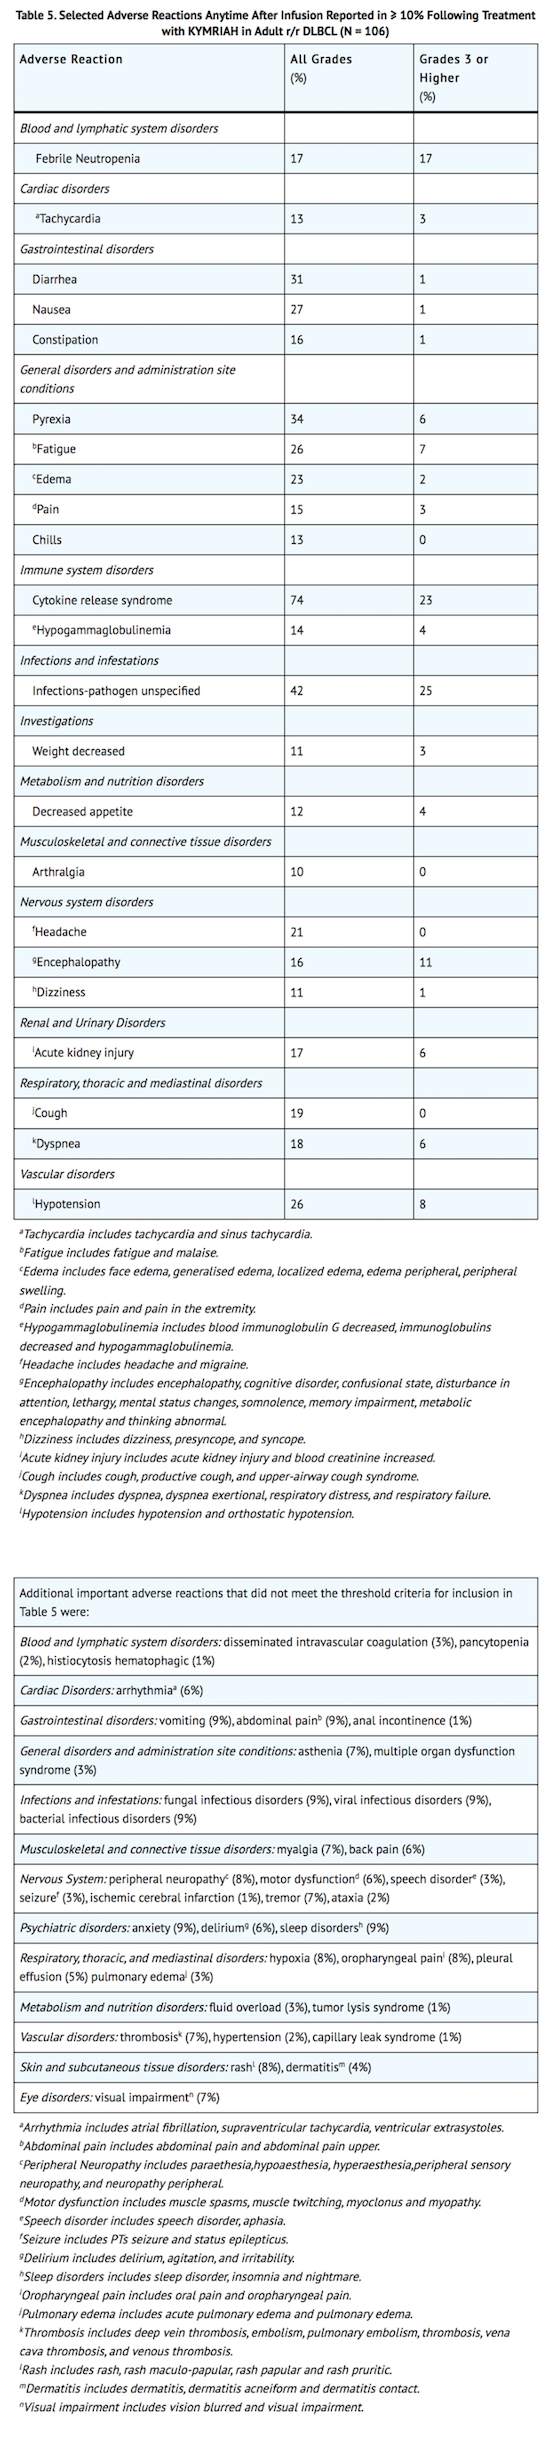 File:Tisagenlecleucel Adverse Reactions Tables 5 and 6.png